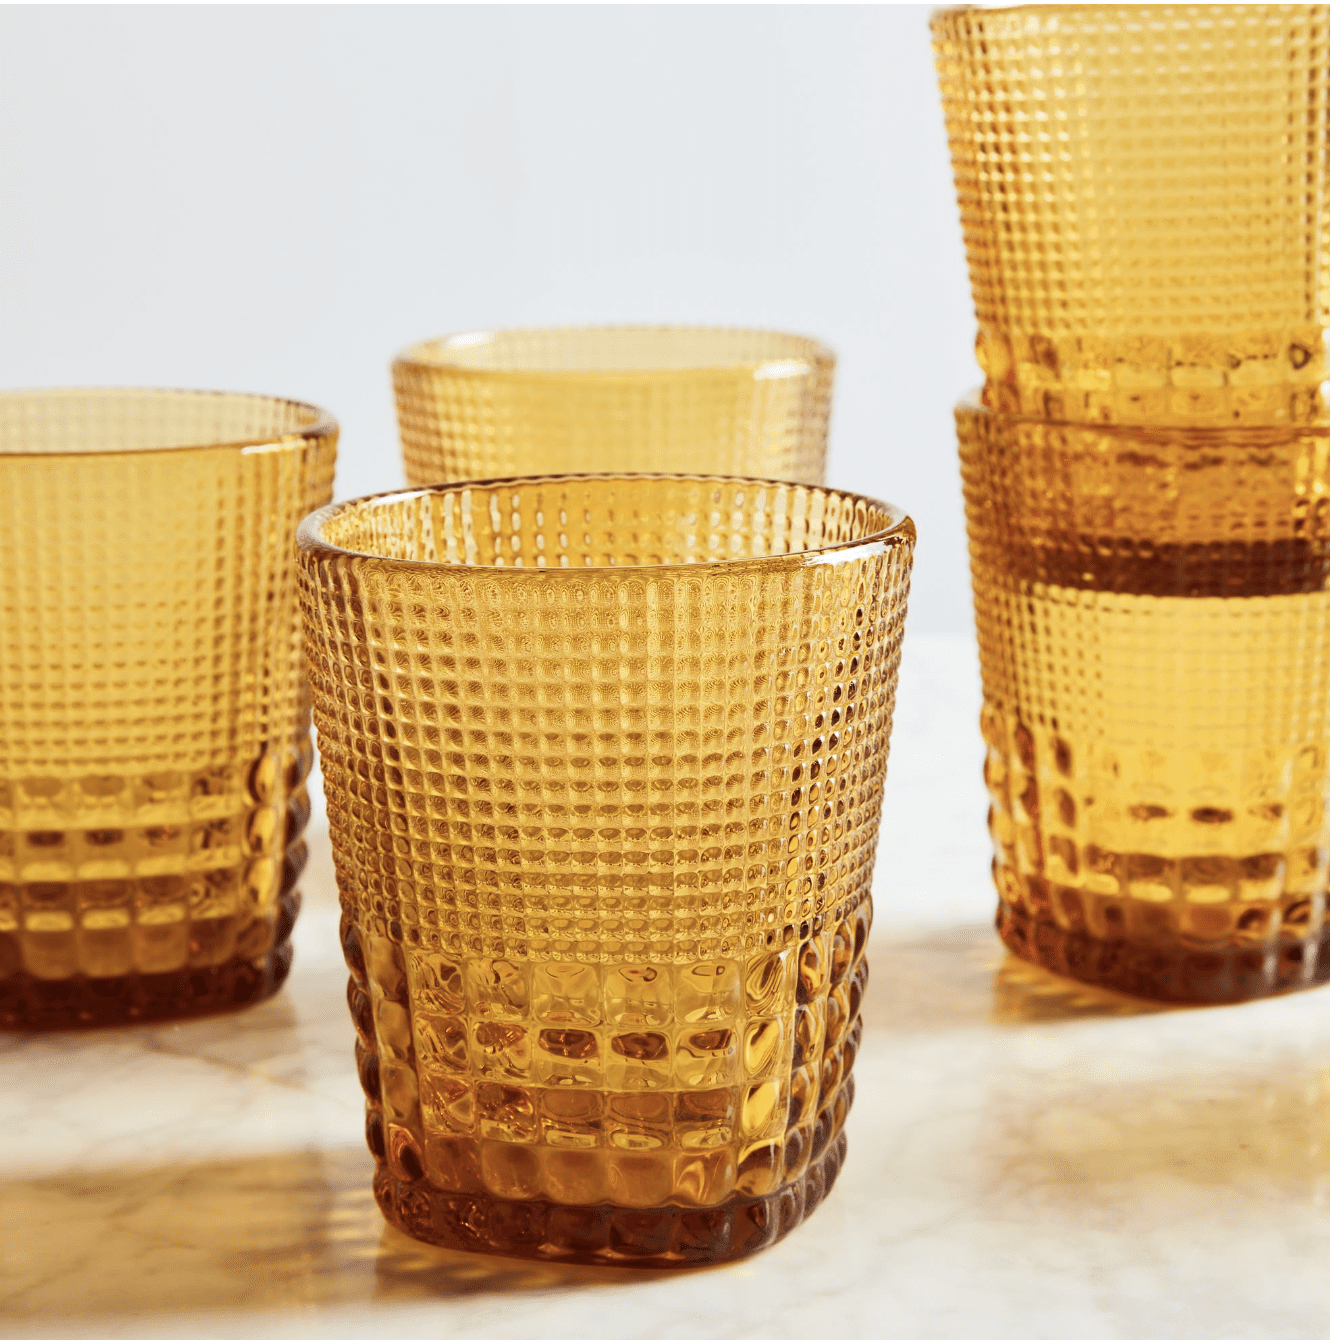 The Cheap, Chic Glassware You Need for Your Next Party